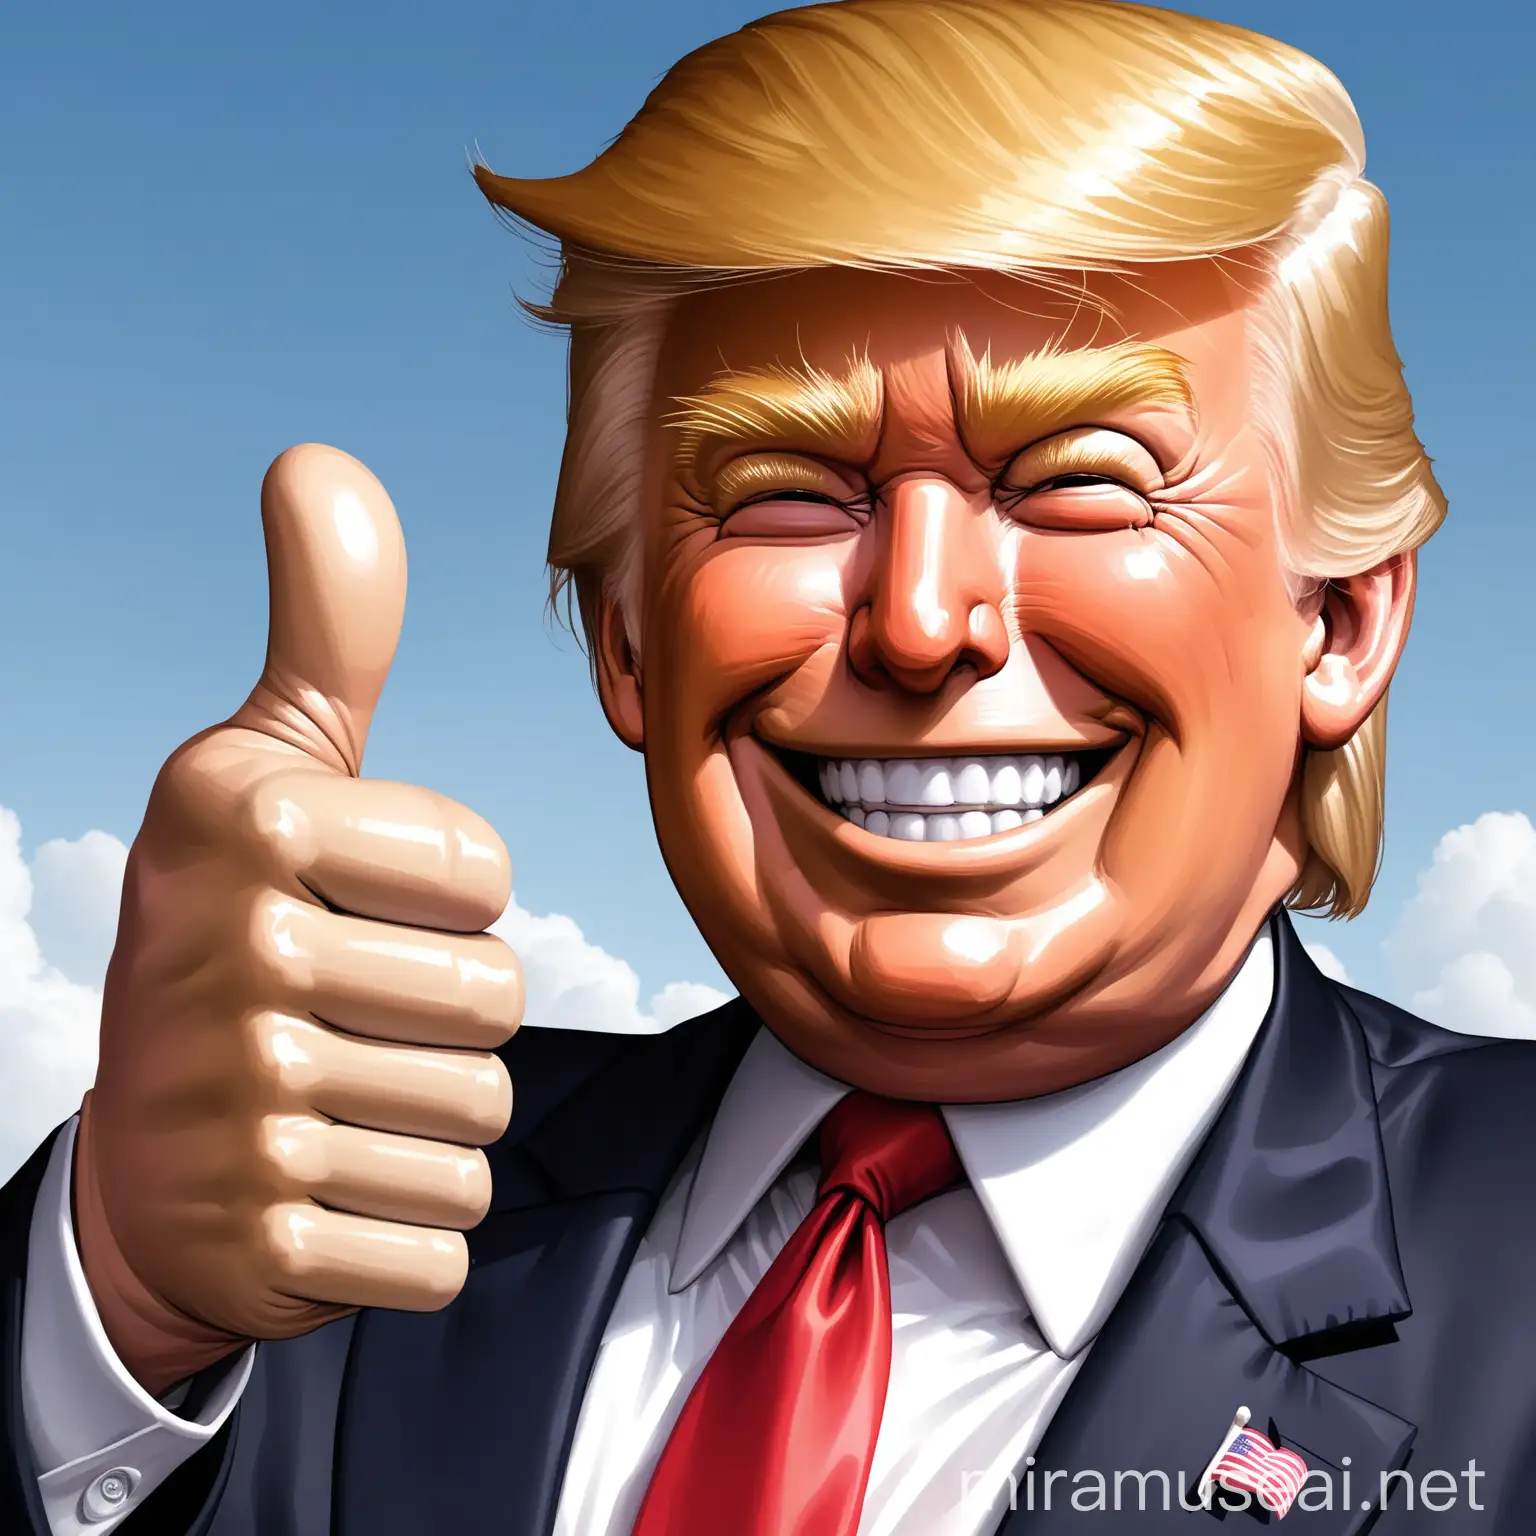 Donald Trump Smiles and Gives Thumbs Up in Approval Gesture